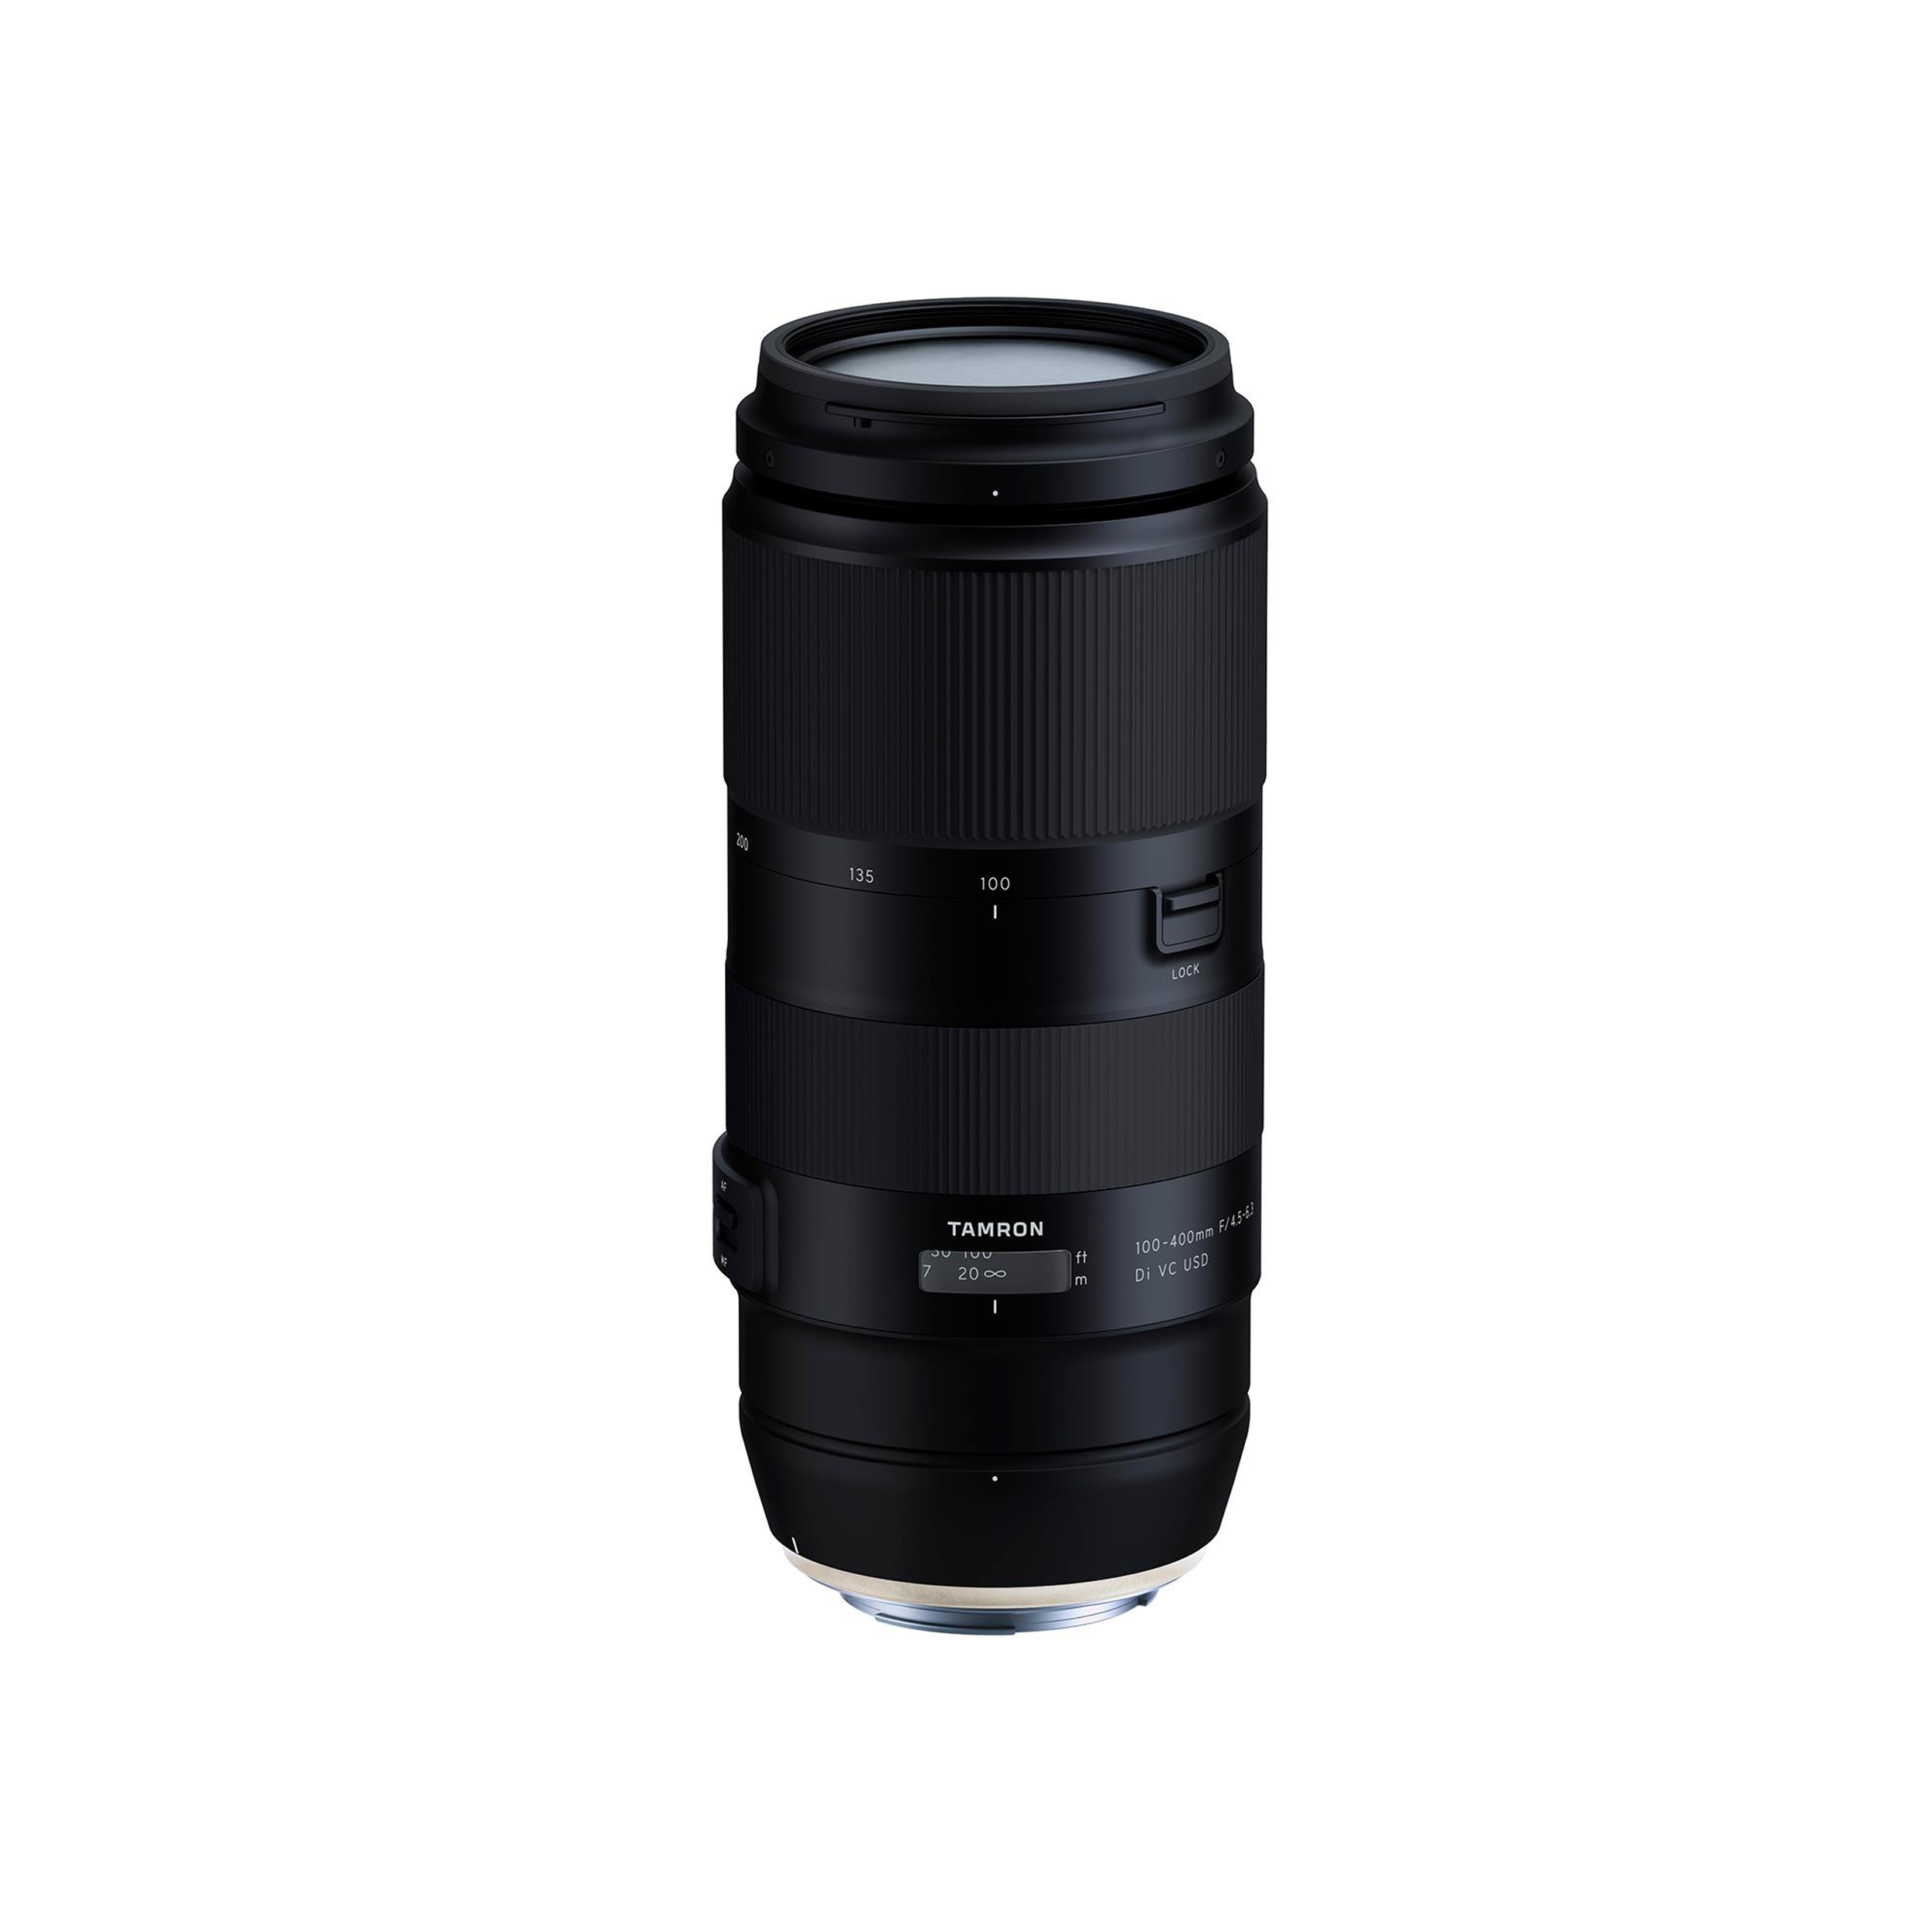 Tamron AF 100-400 mm f / 4.5-6.3 DI VC USD pour le support canon EF